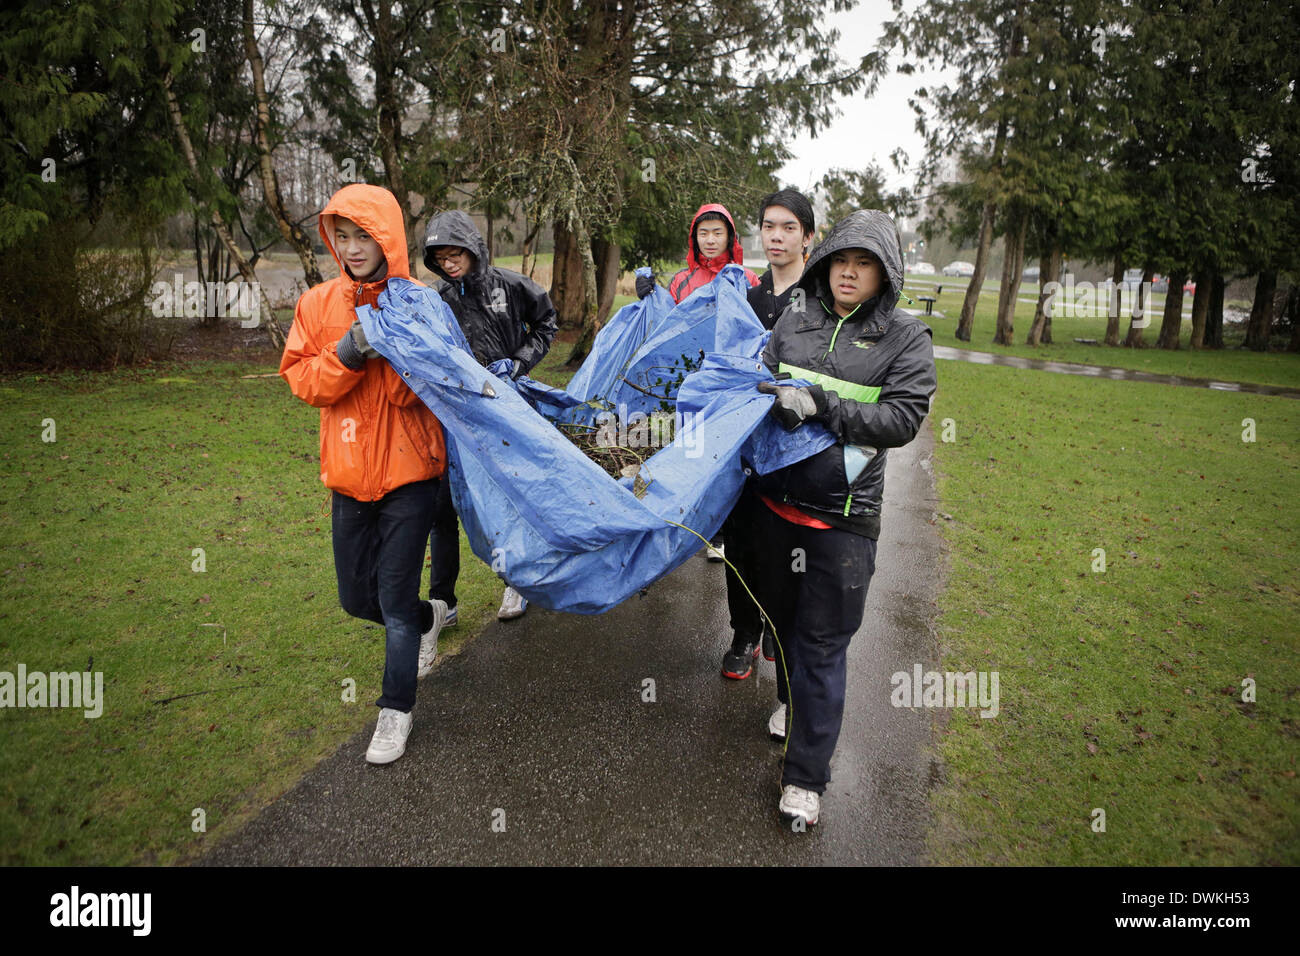 Vancouver, Canada. 10th Mar, 2014. Volunteers remove the invasive species at a park in Richmond, Canada, March 10, 2014. About 90 youth volunteers organized through social media joined together to remove invasive plants from the community parks. The organizers wish to help protecting the natural habitat and promote the public awareness of environmental protection via this periodic volunteering event. © Liang Sen/Xinhua/Alamy Live News Stock Photo